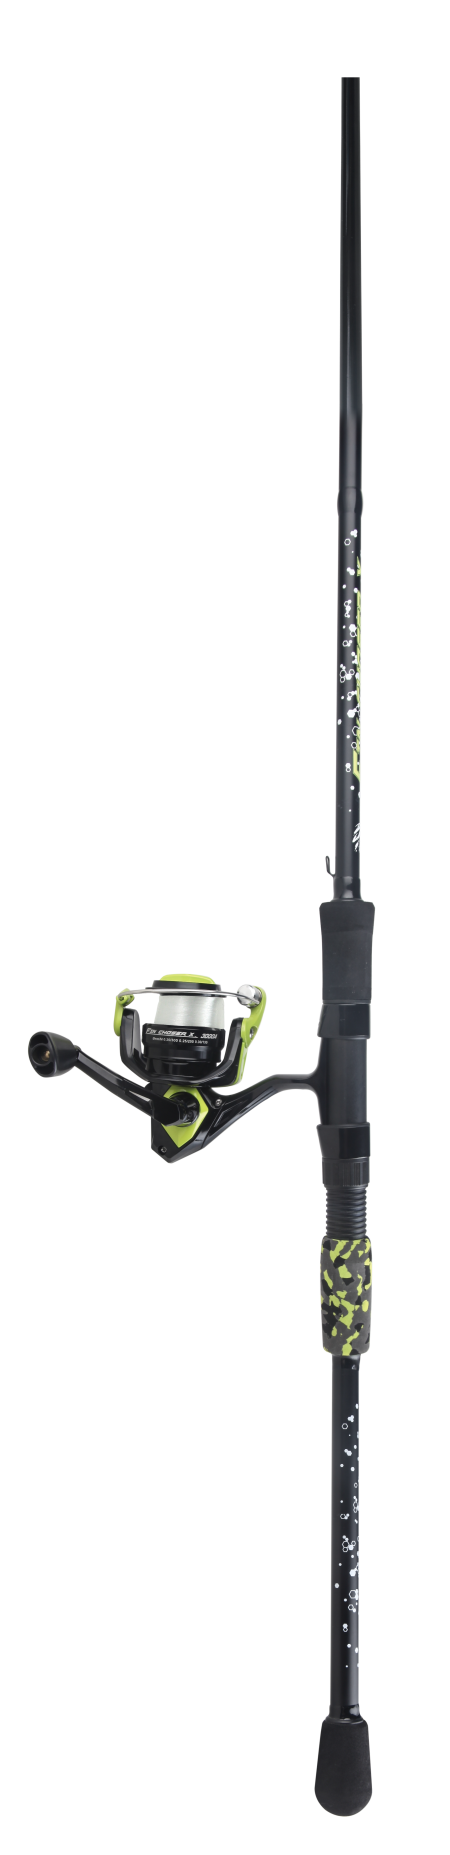 Okuma Fin Chaser X 8ft Rod, Reel & Line Spinning Combo, 8 Ft, 4000 Series, Beginners Fishing Rod & Reel Combo, at Rs 2028.00, Fishing Reels